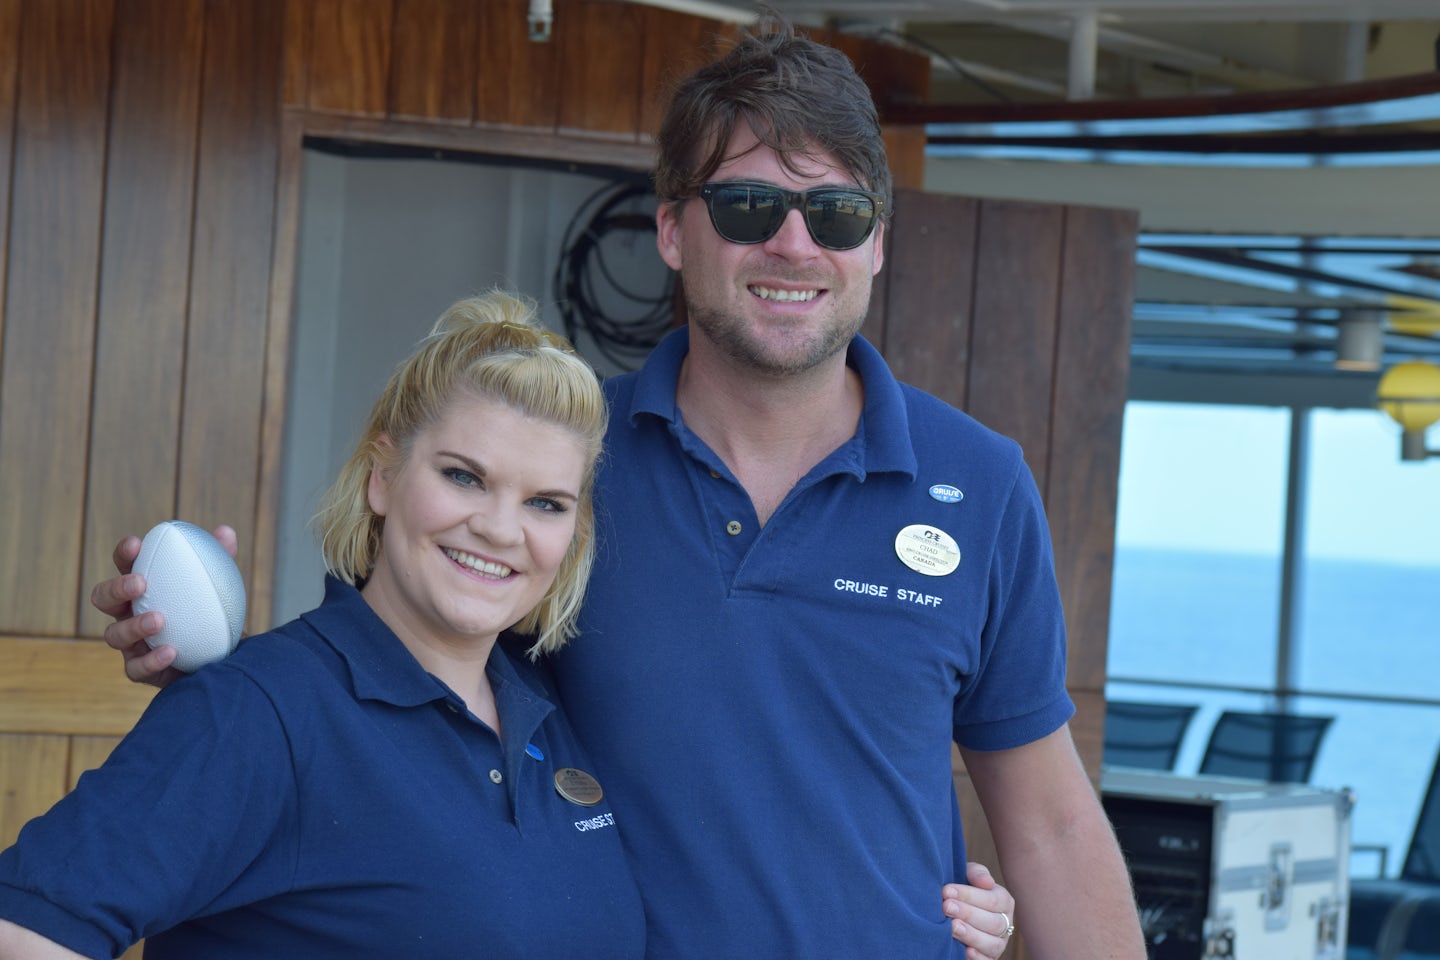 We love attending the trivia and other fun games held on board and the cruise staff, including Chad and Emma pictured here, were delightful!